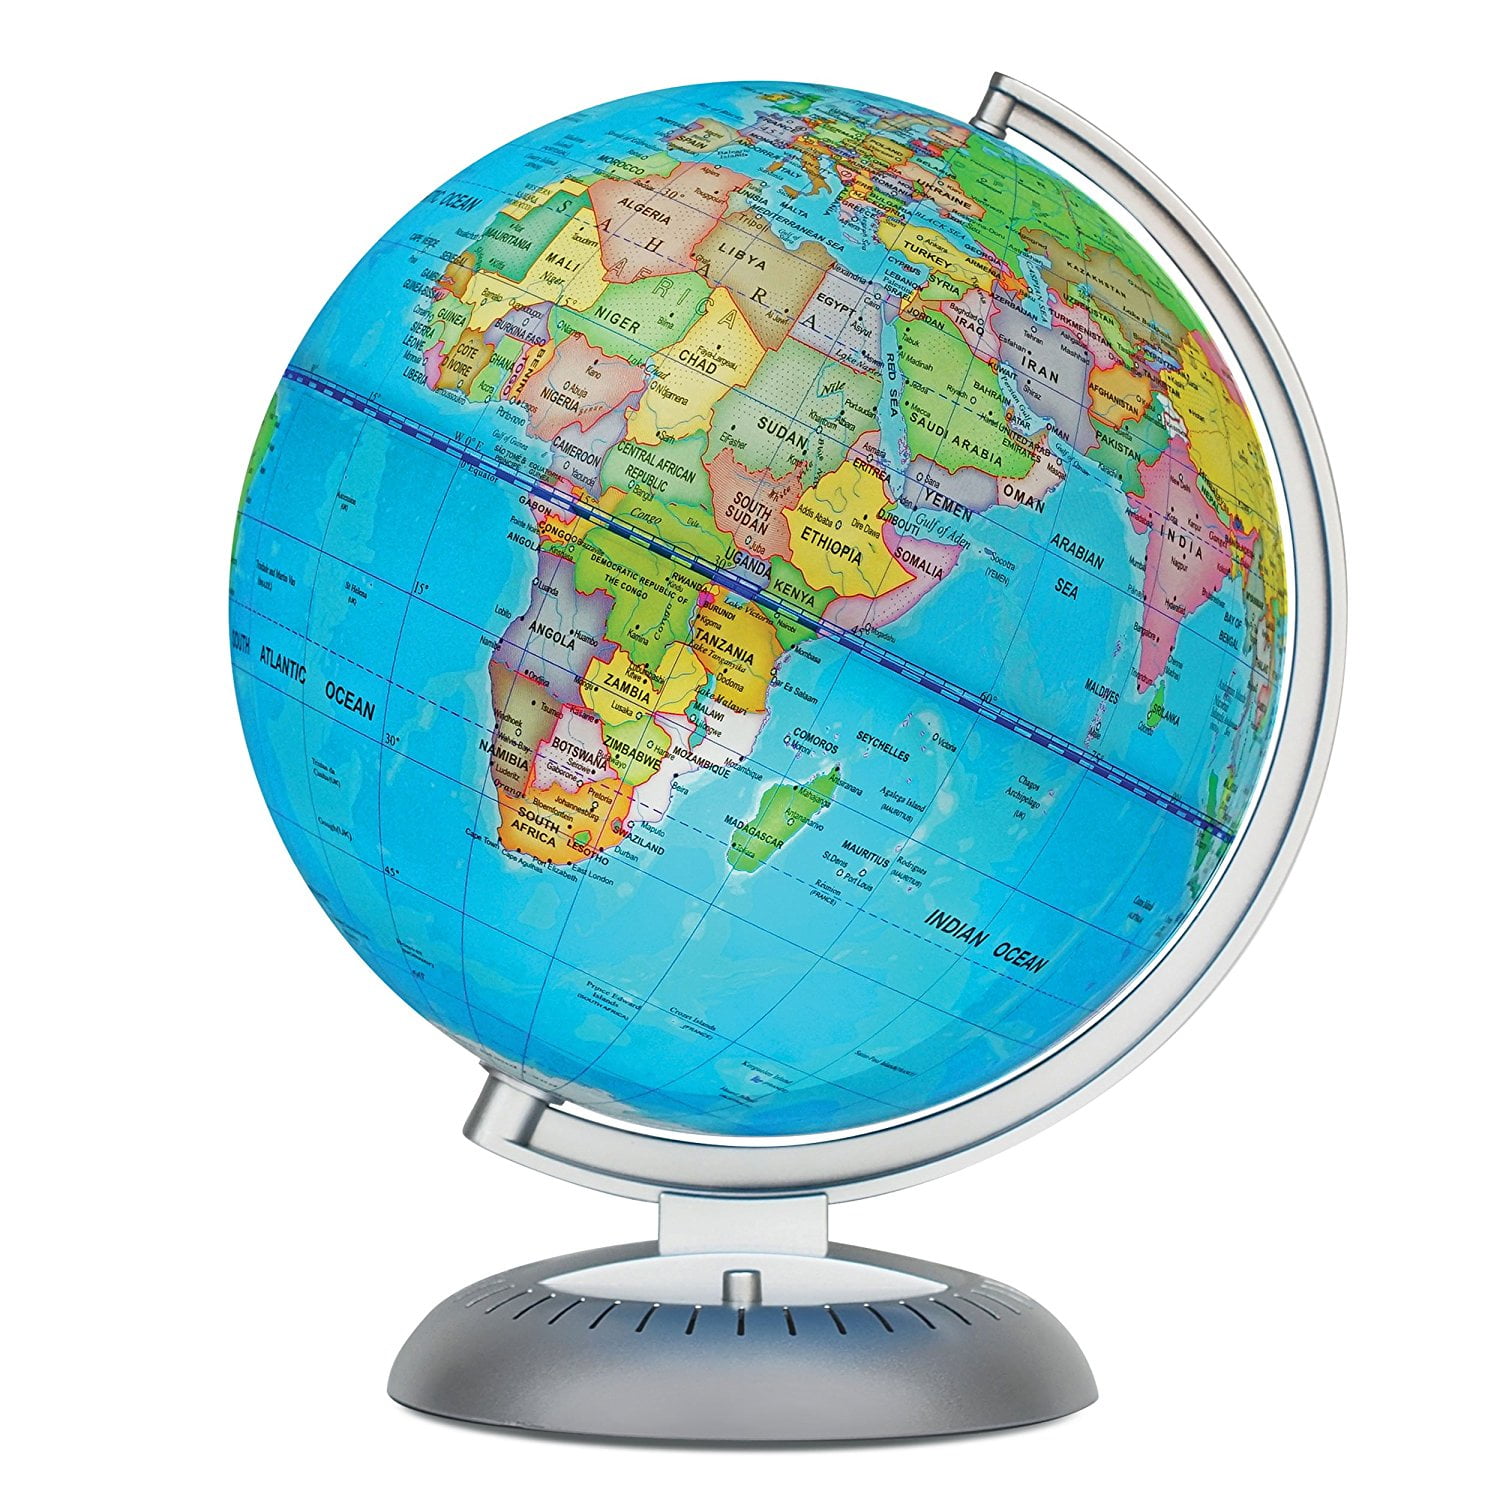 World Globe Illuminated 8" Up-to-date Built-in LED Night Light Battery Operated 